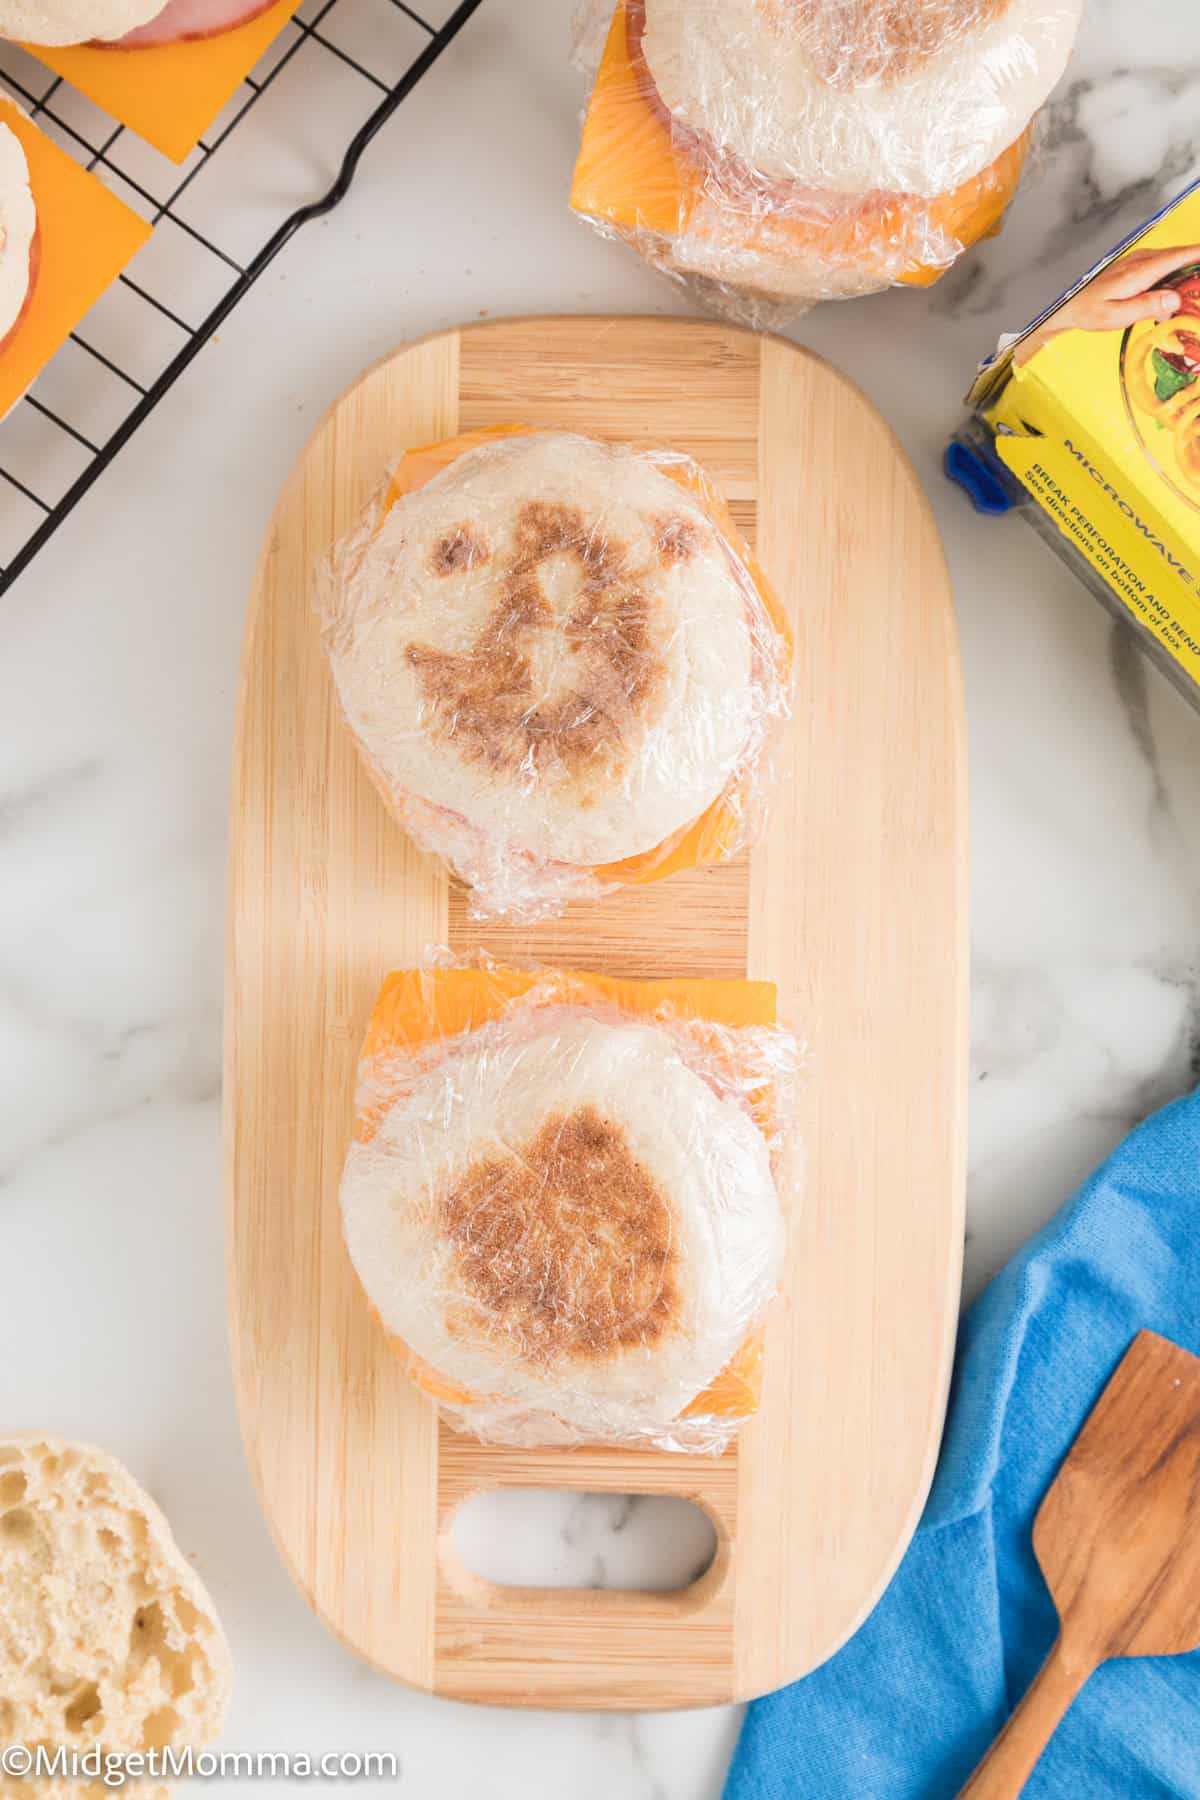 Two wrapped English muffins with cheese slices on a wooden board. One has a pattern resembling a smiling face. Unwrapped muffins and a box of cheese are nearby.